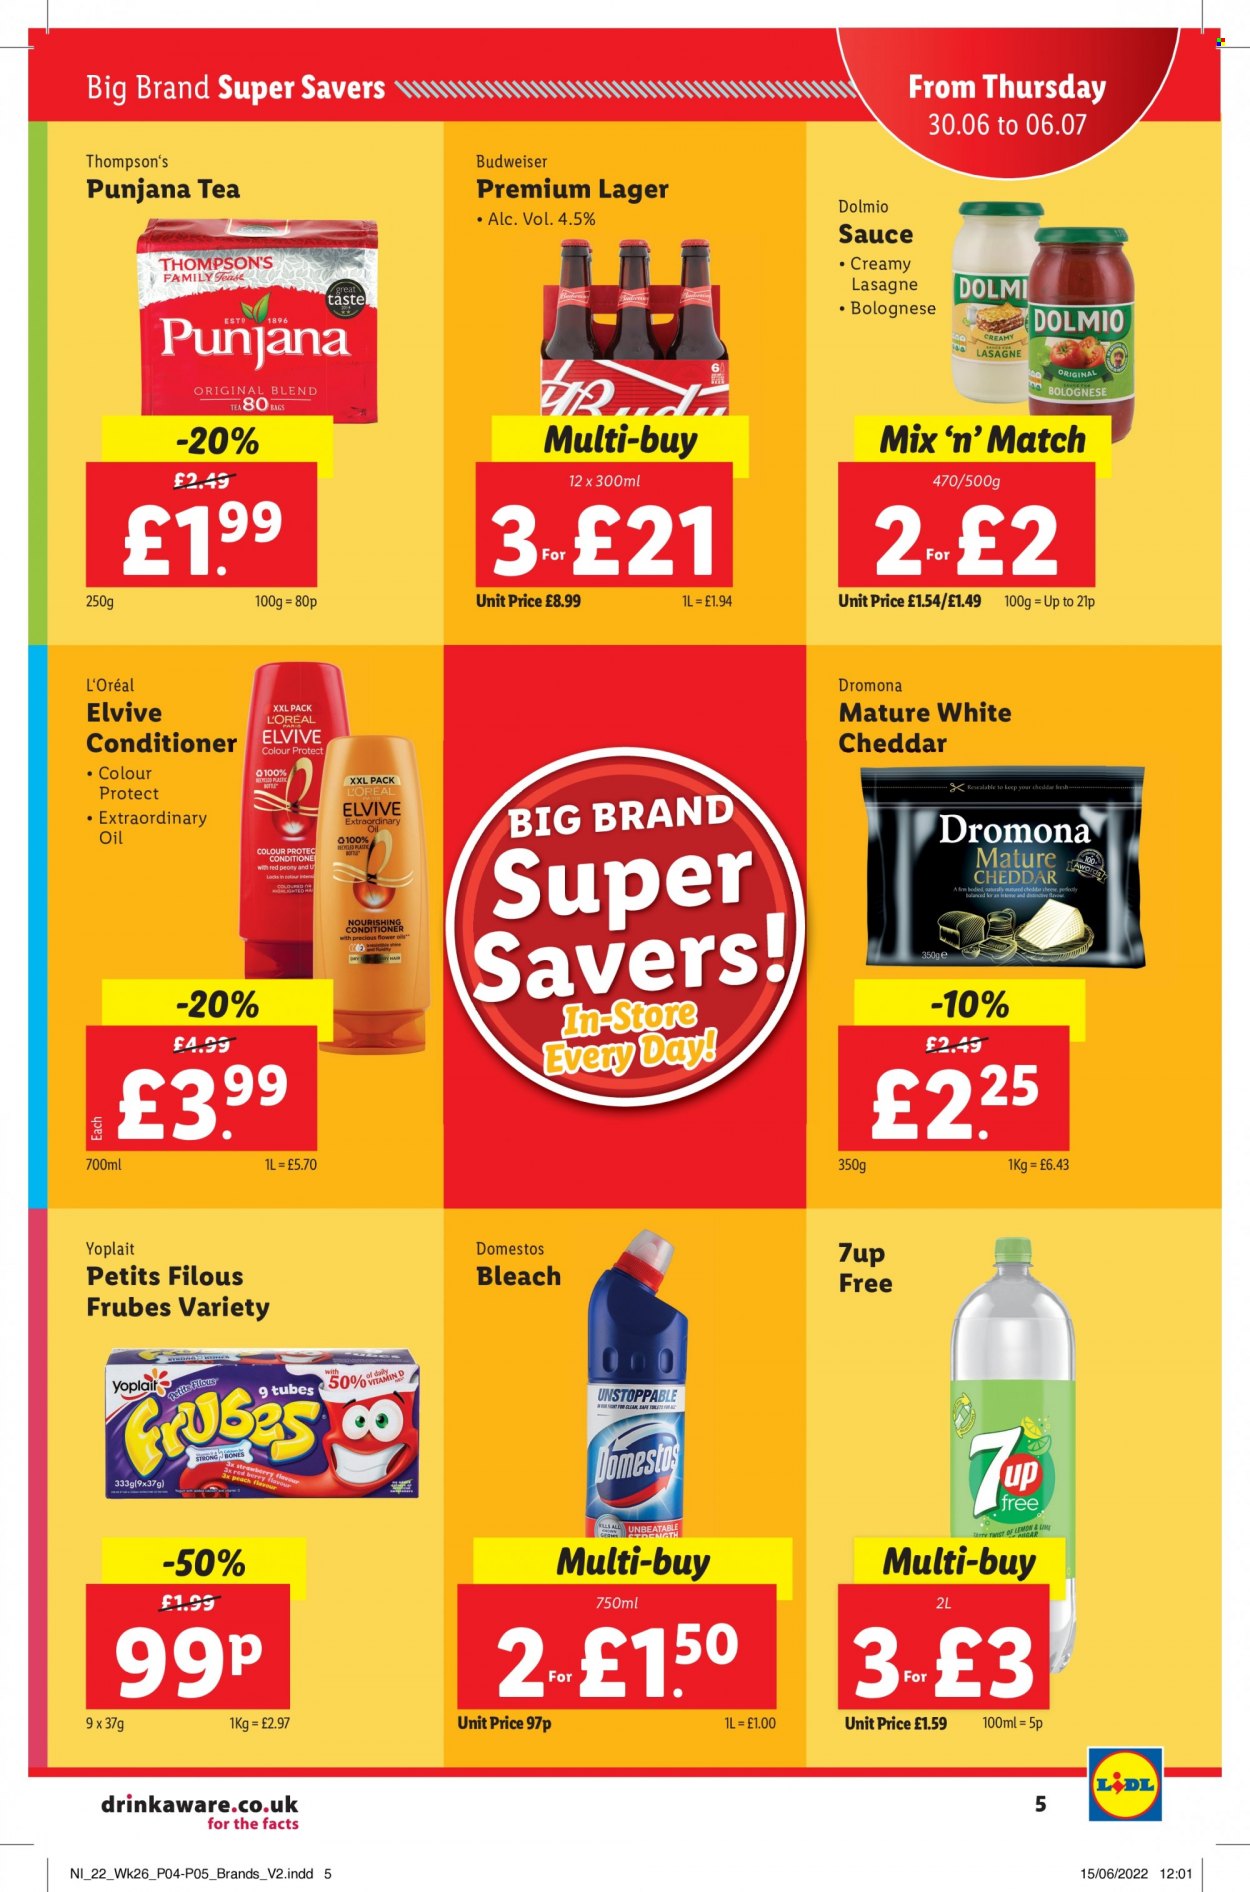 thumbnail - Lidl offer  - 30/06/2022 - 06/07/2022 - Sales products - Budweiser, beer, Lager, sauce, cheddar, cheese, Frubes, Petits Filous, Yoplait, oil, 7UP, tea, Punjana, Domestos, bleach, L’Oréal, conditioner, Thompson's. Page 5.